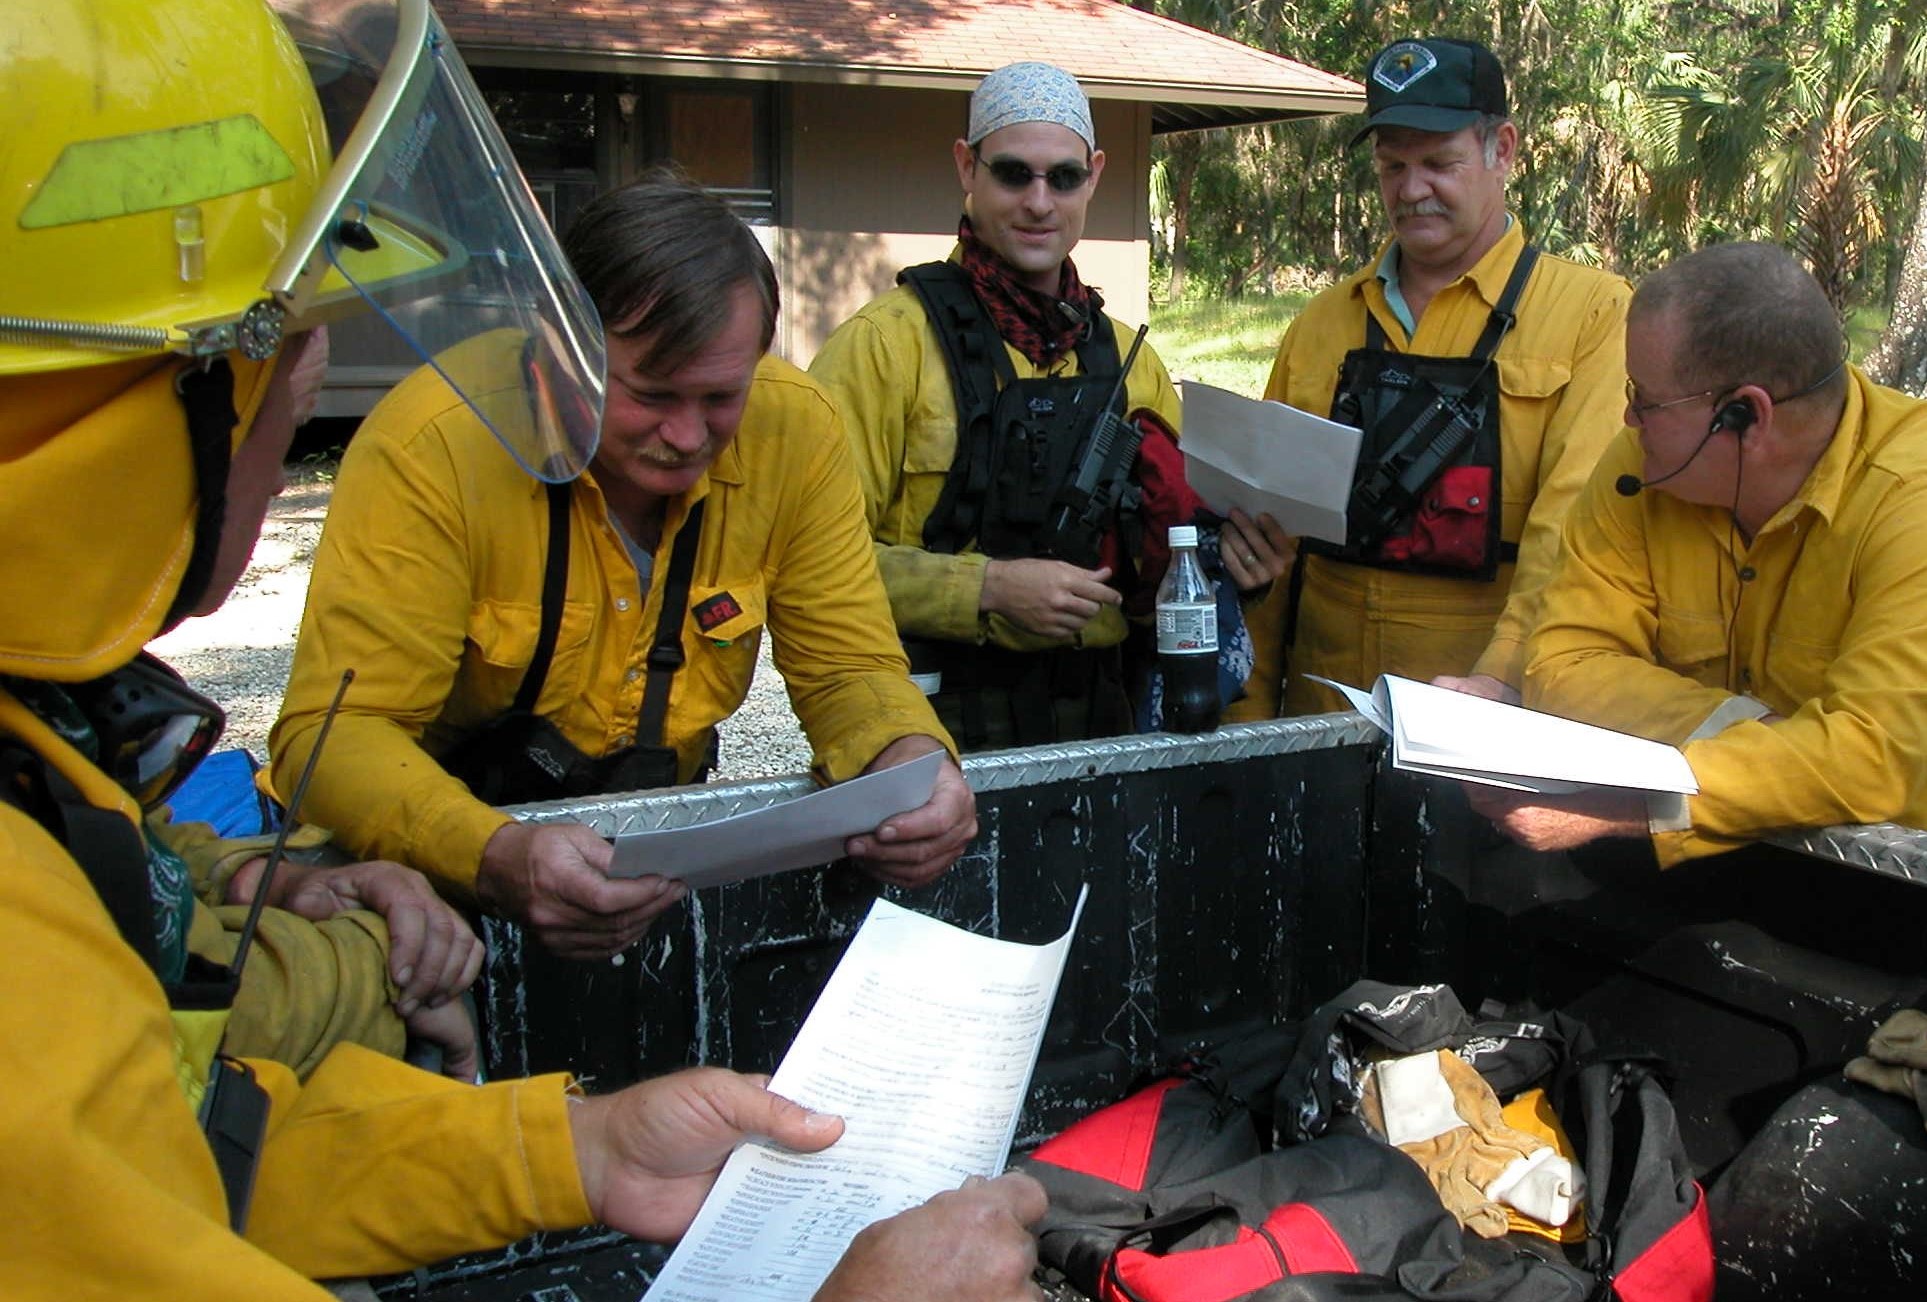 The fire team preparing for a prescribed burn by reviewing paperwork.